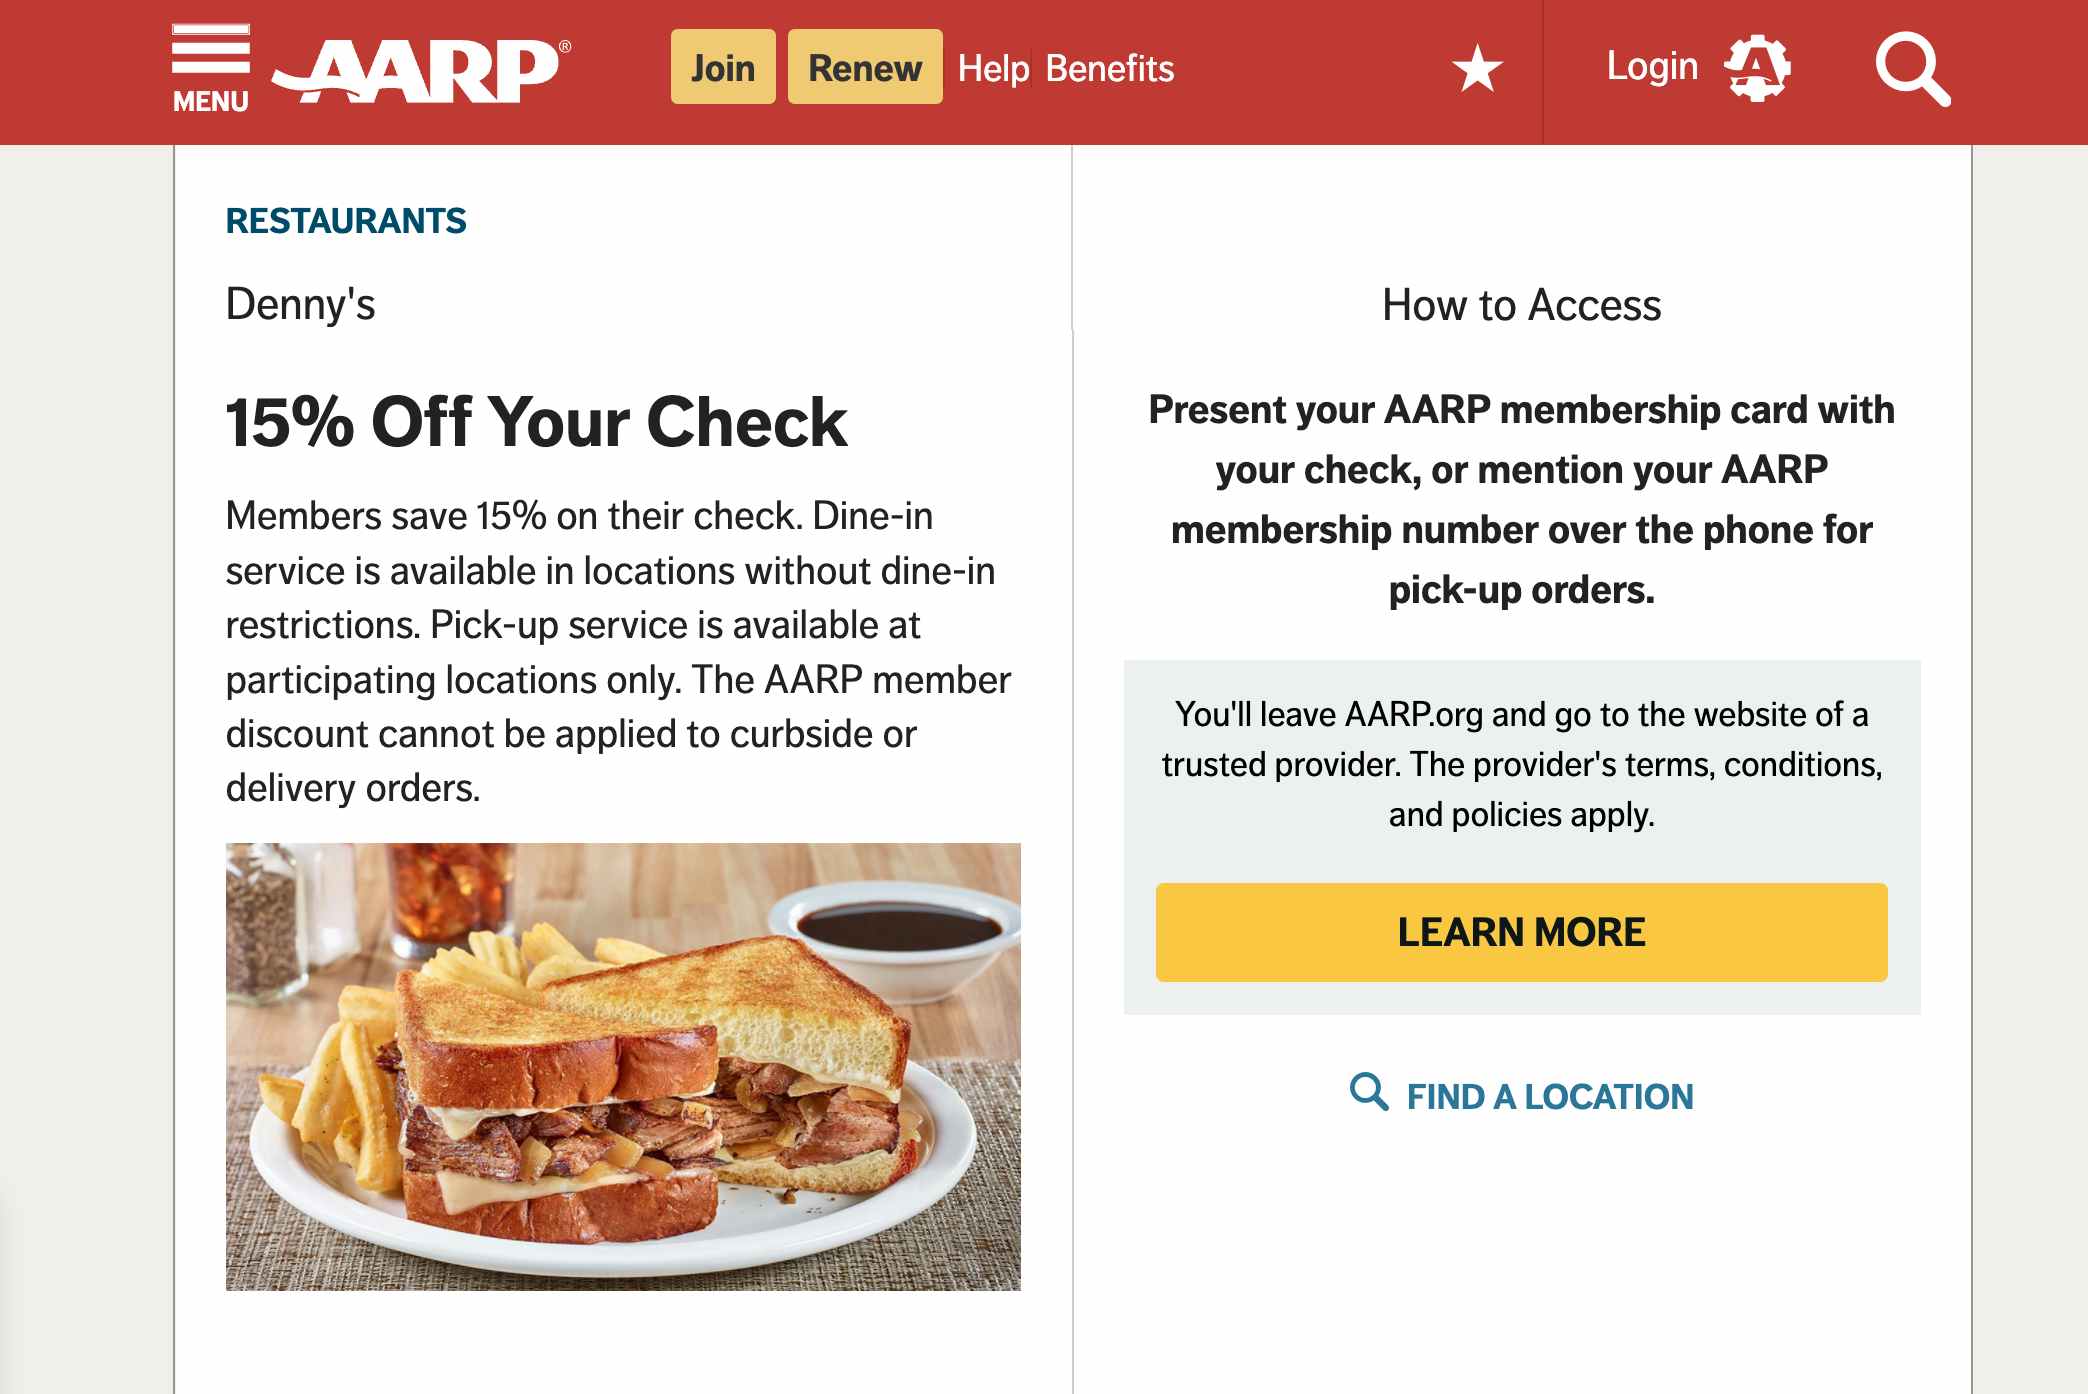 A screenshot from the AARP website showing a discount for 15% off at Denny's.